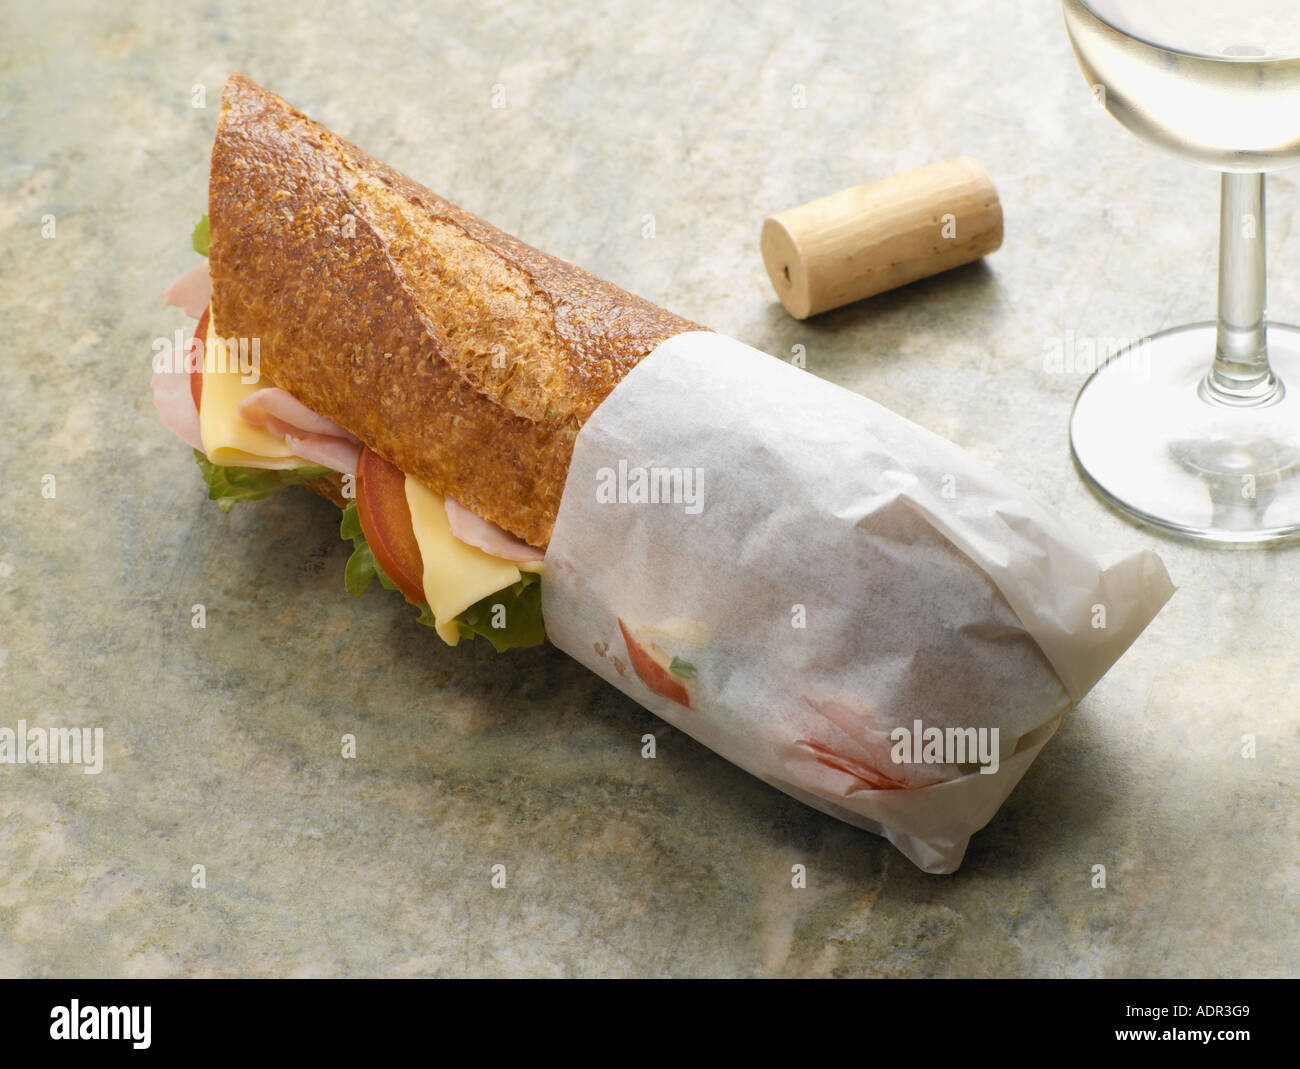 Baguette and wine Stock Photo